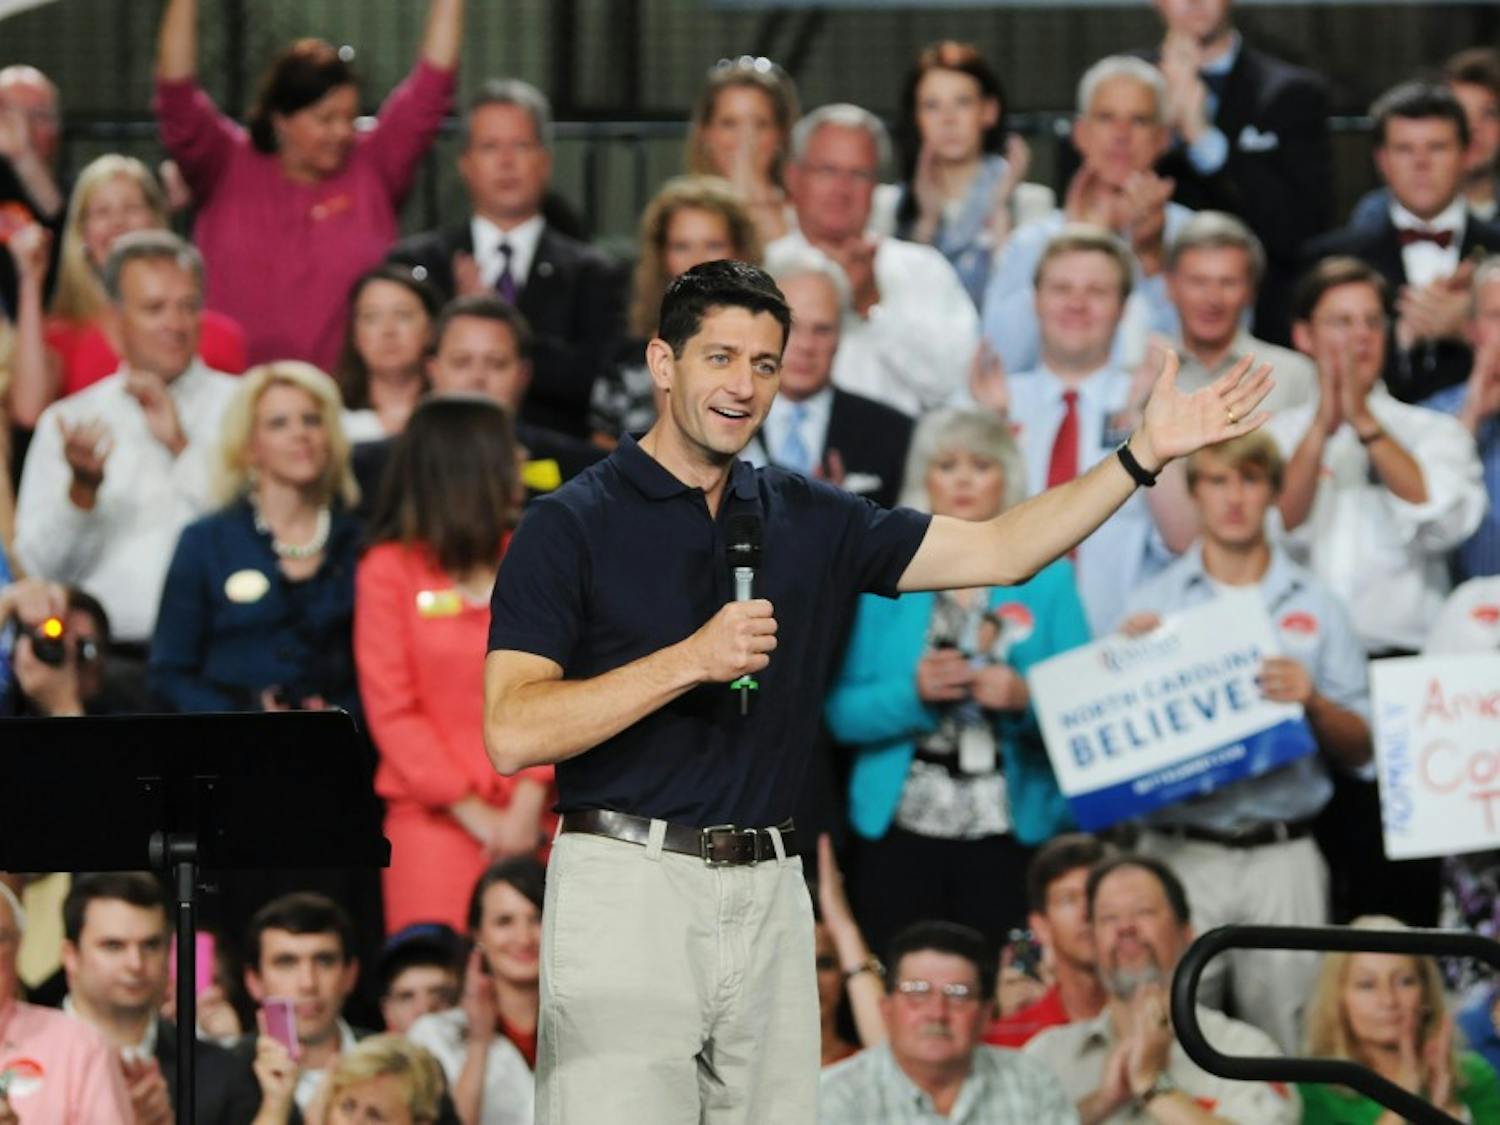 	GOP vice presidential nominee Paul Ryan spoke at the &#8220;Victory Rally with Paul Ryan &amp; the GOP Team&#8221; in Raleigh, NC at SMT Inc. 